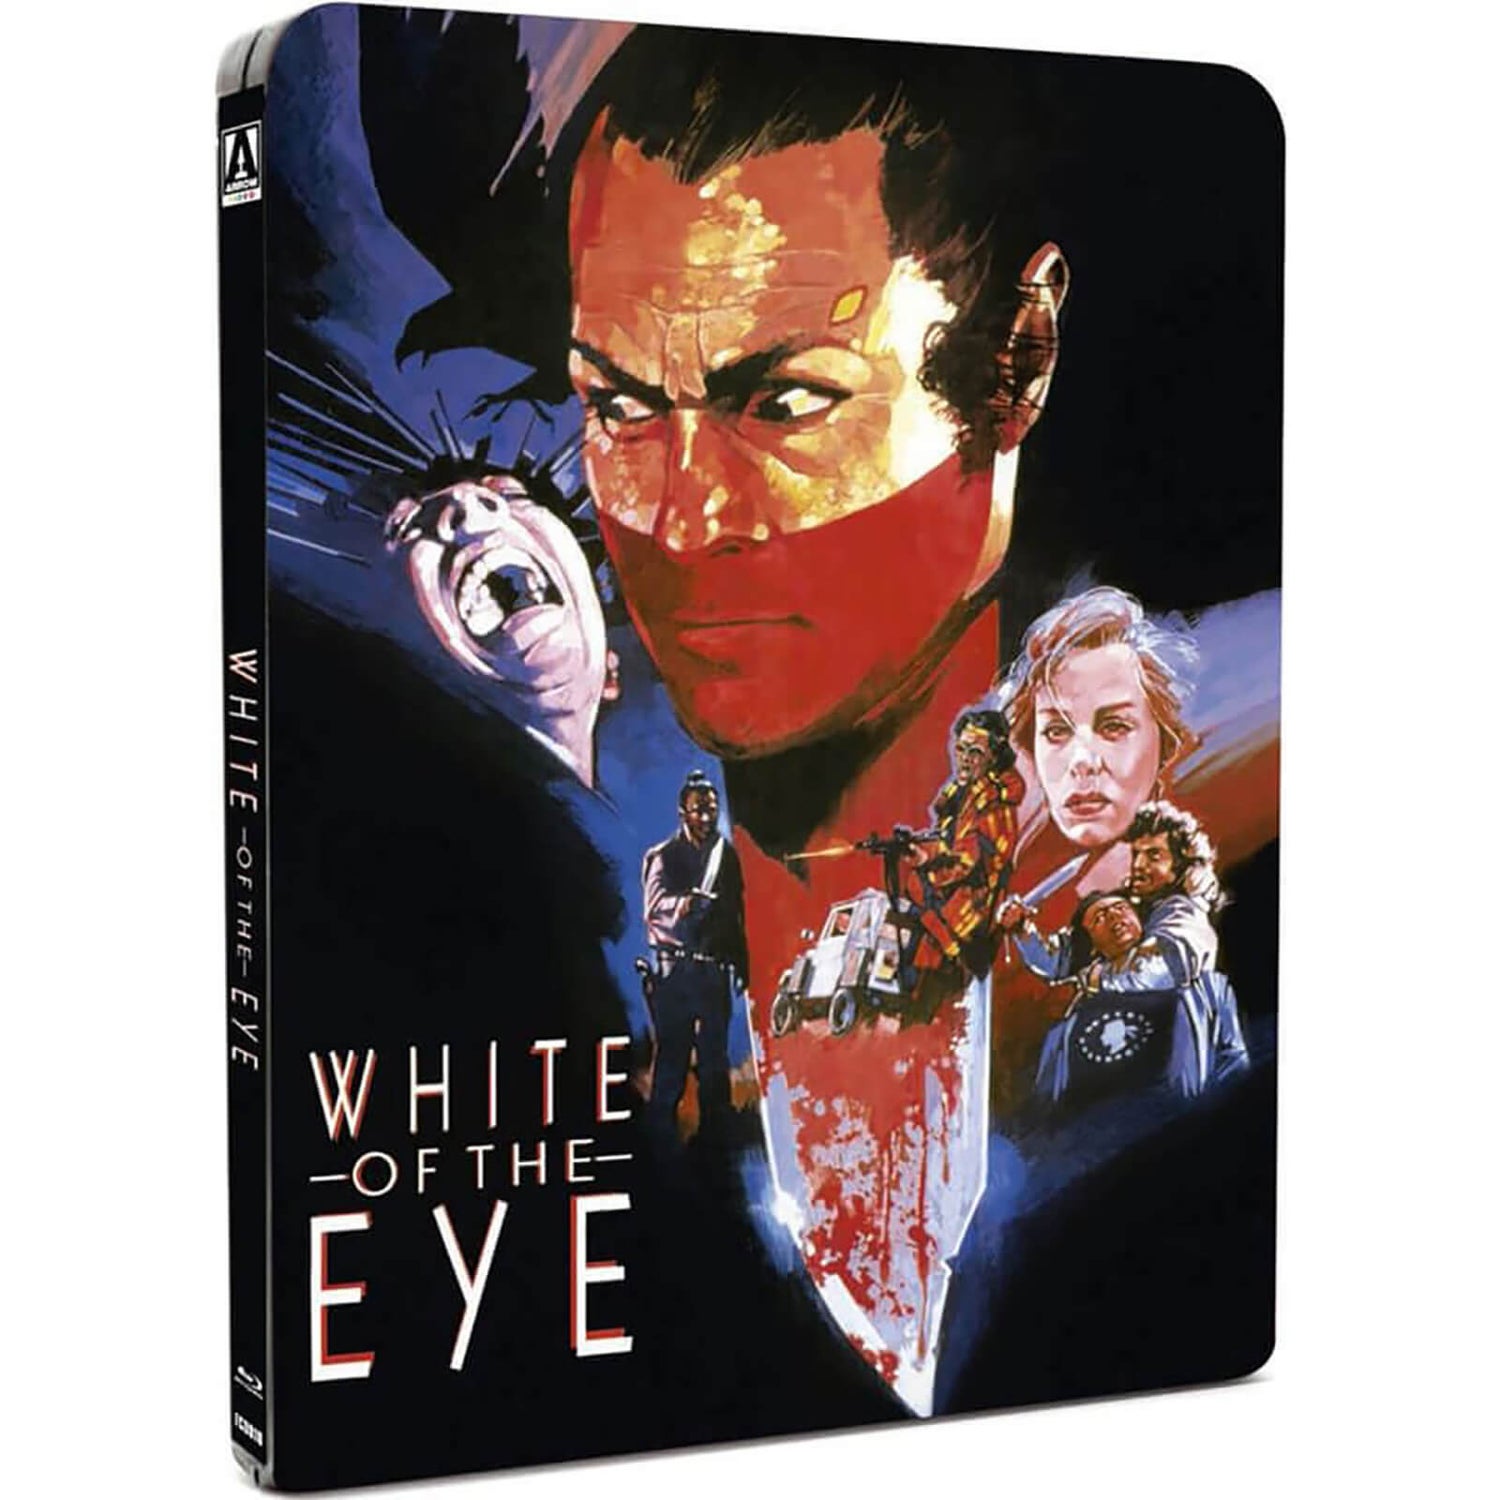 White of the Eye - Limited Edition Steelbook (Dual Format Edition)